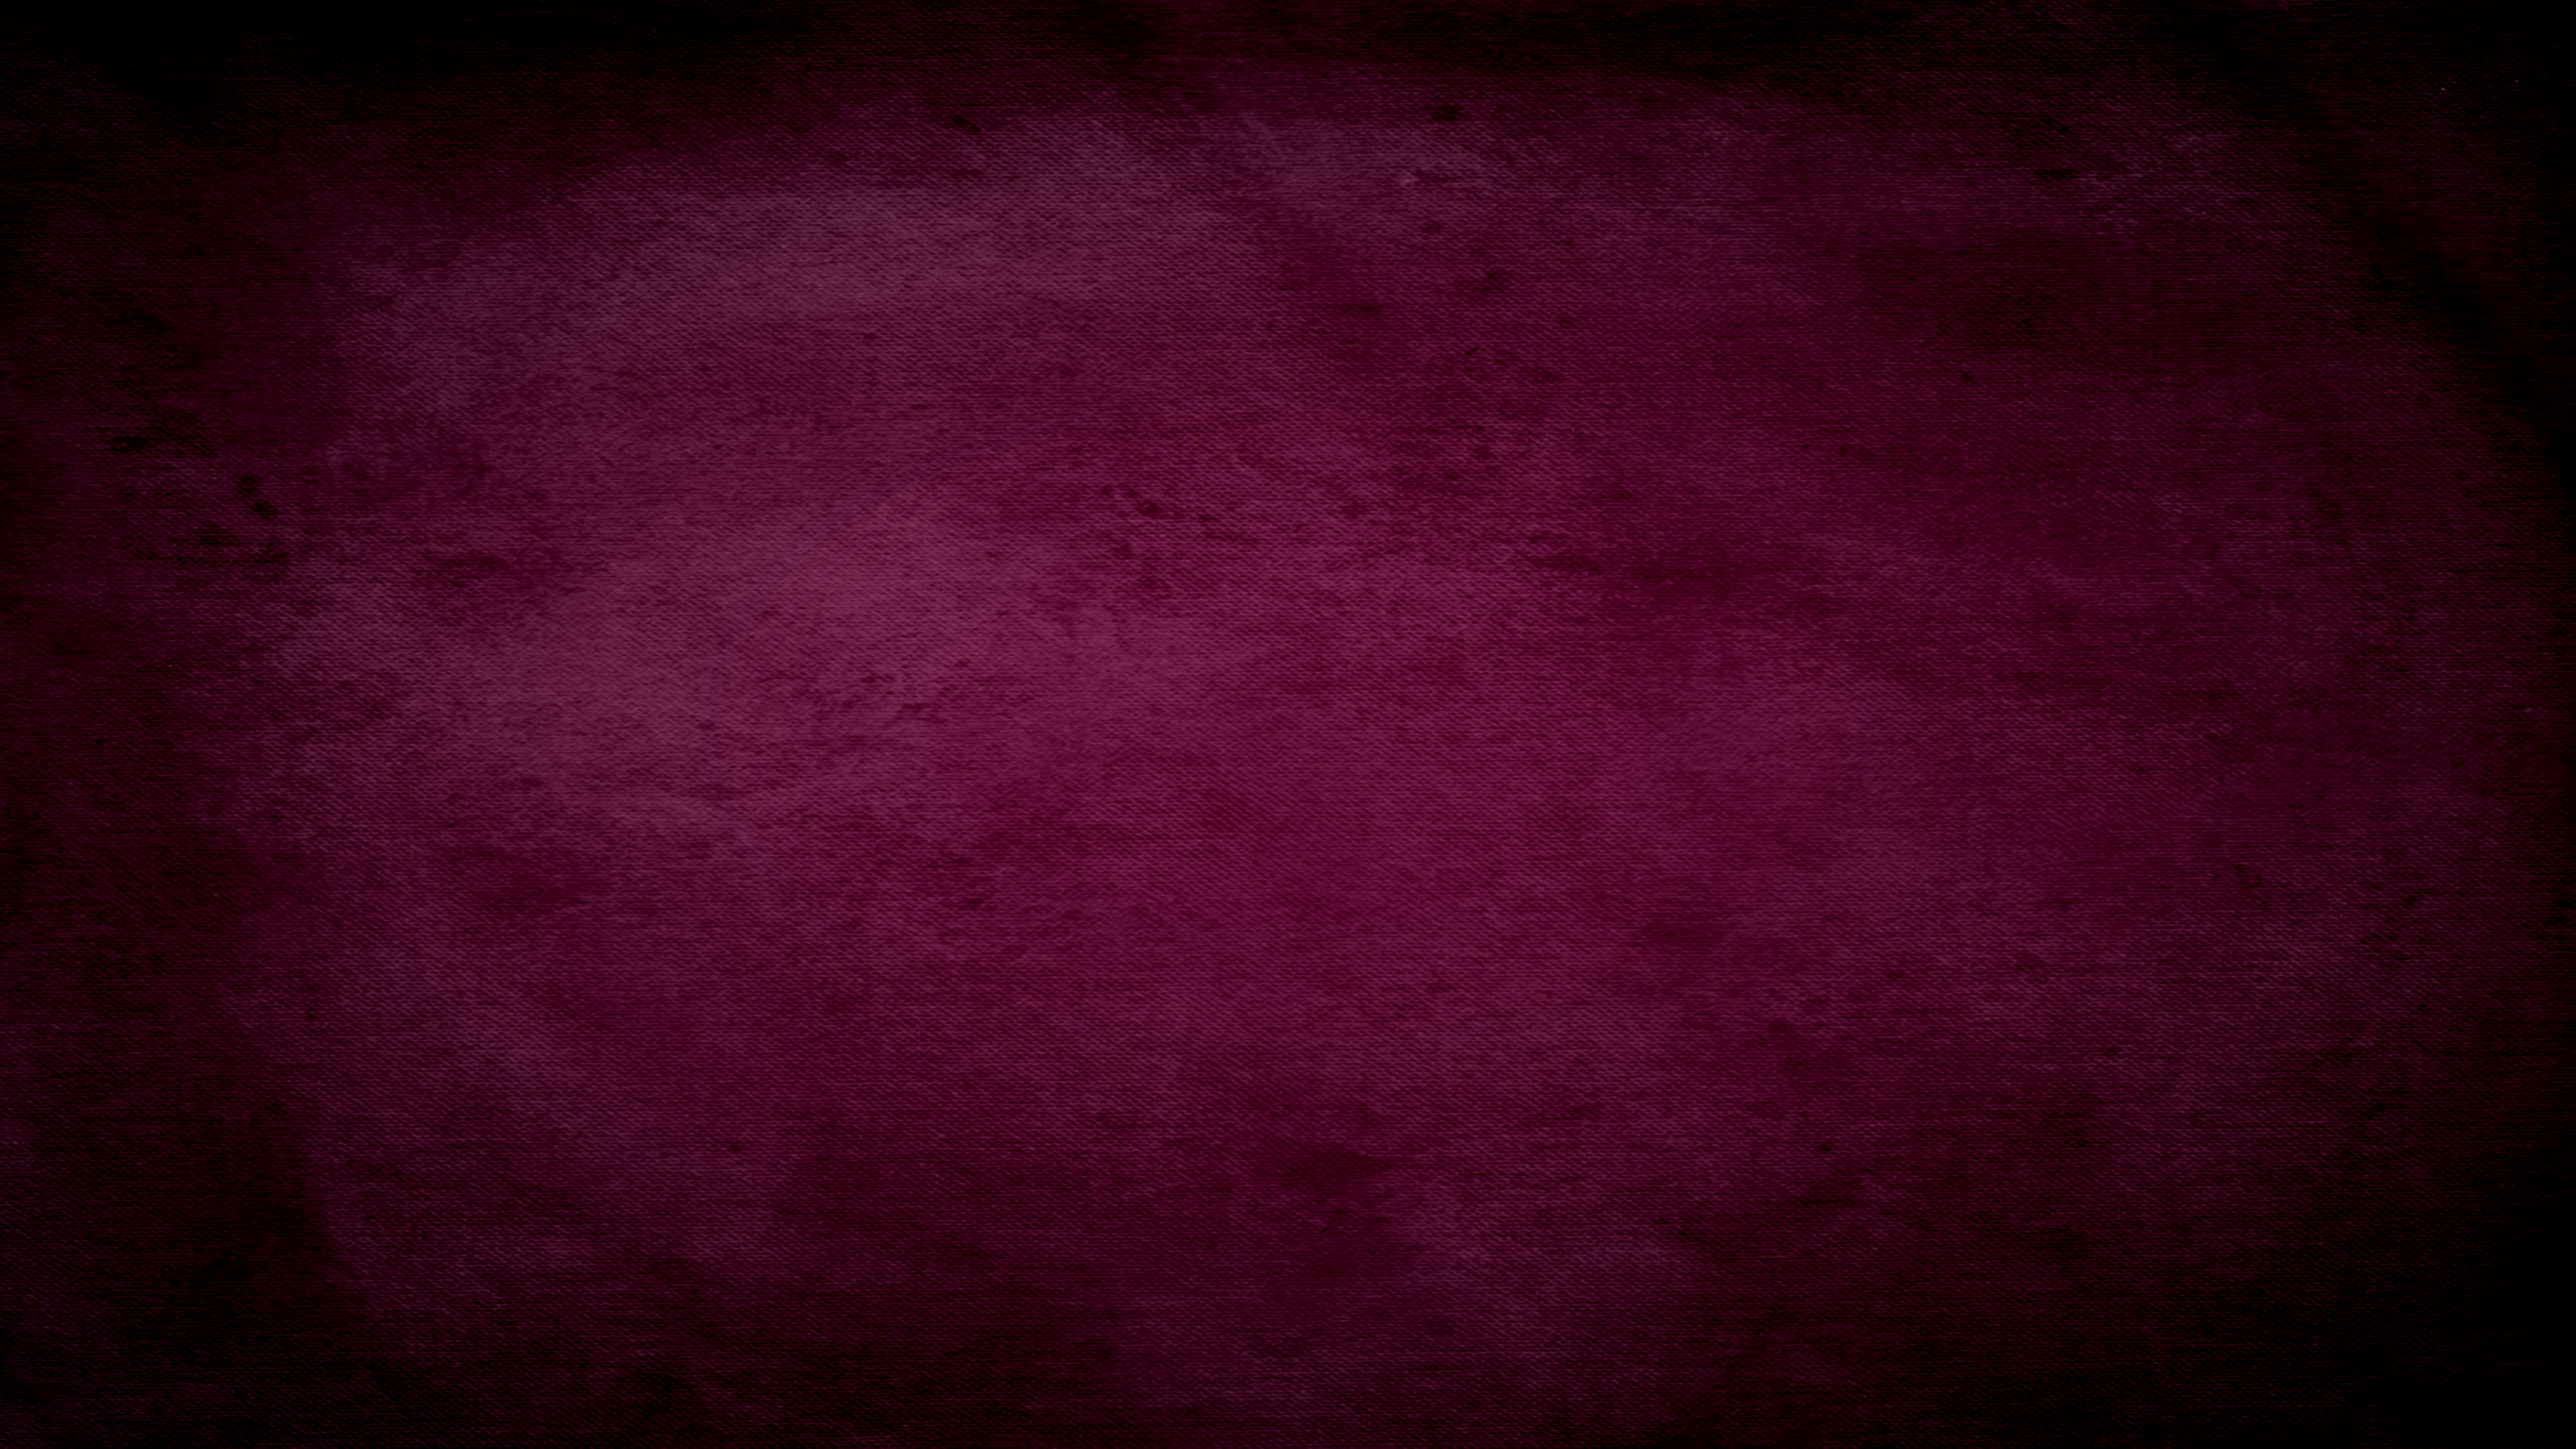 Free Pink and Black Texture Background